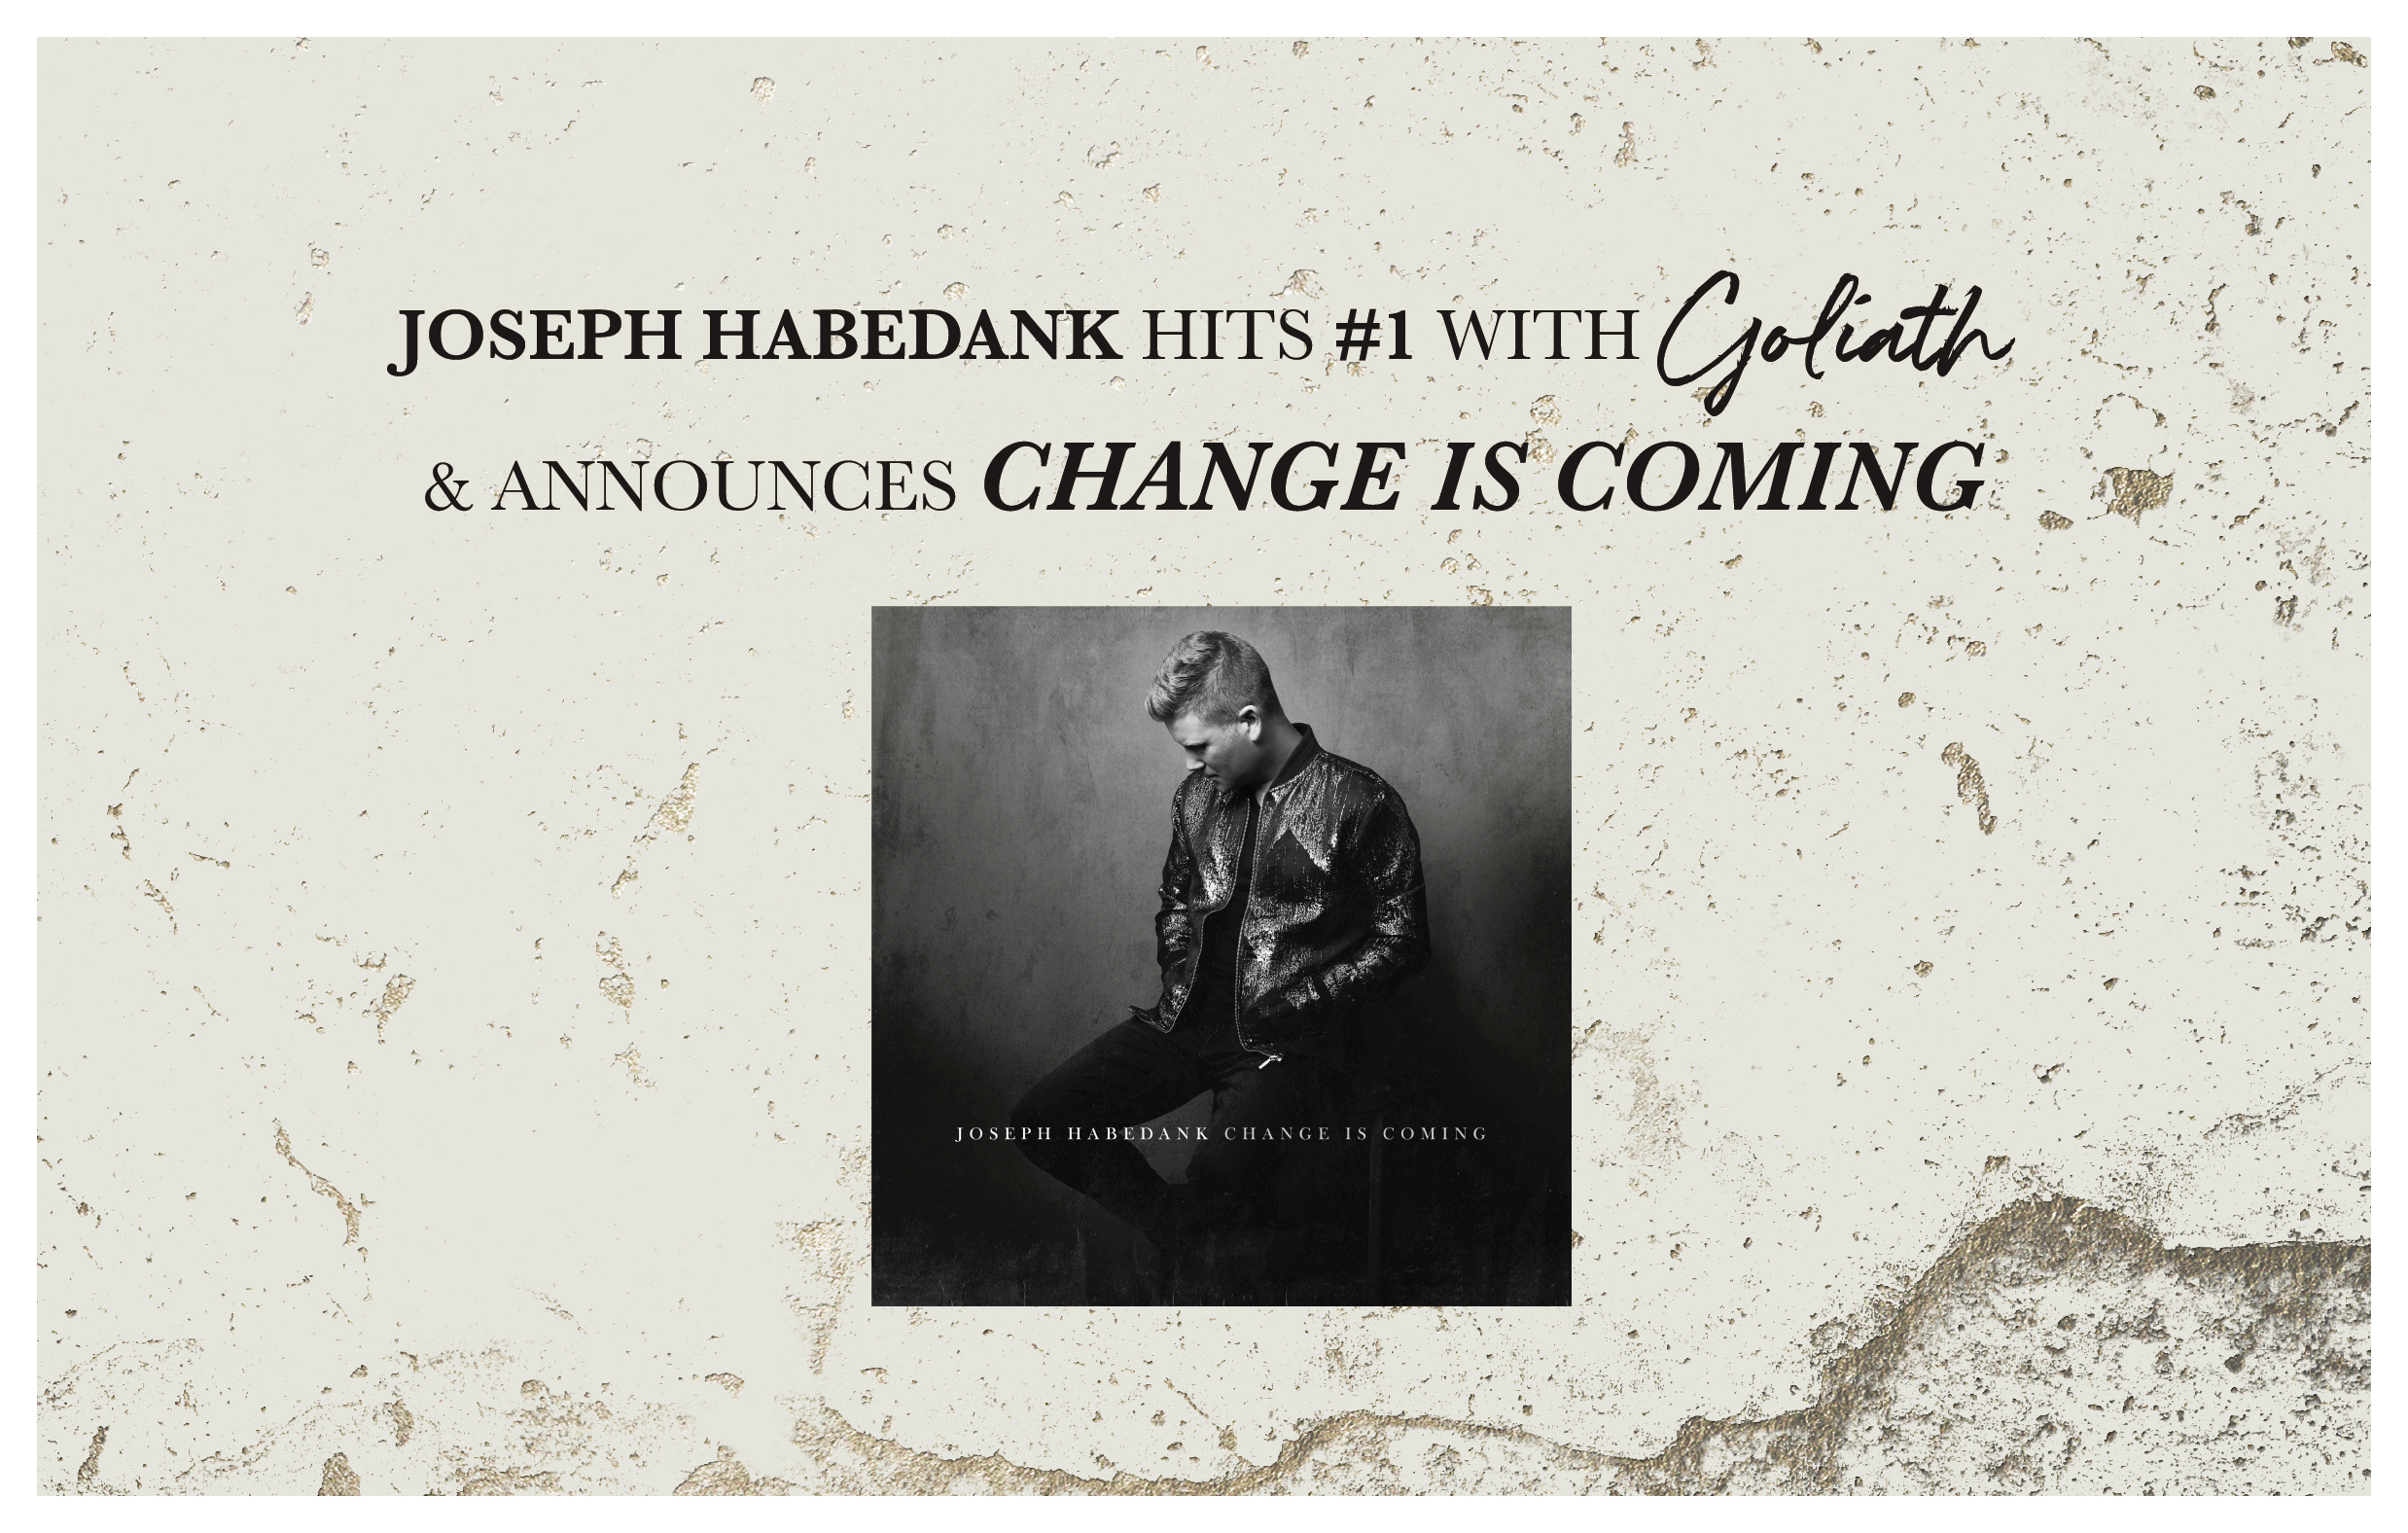 Joseph Habedank Hits #1 with “Goliath” & Announces Change is Coming